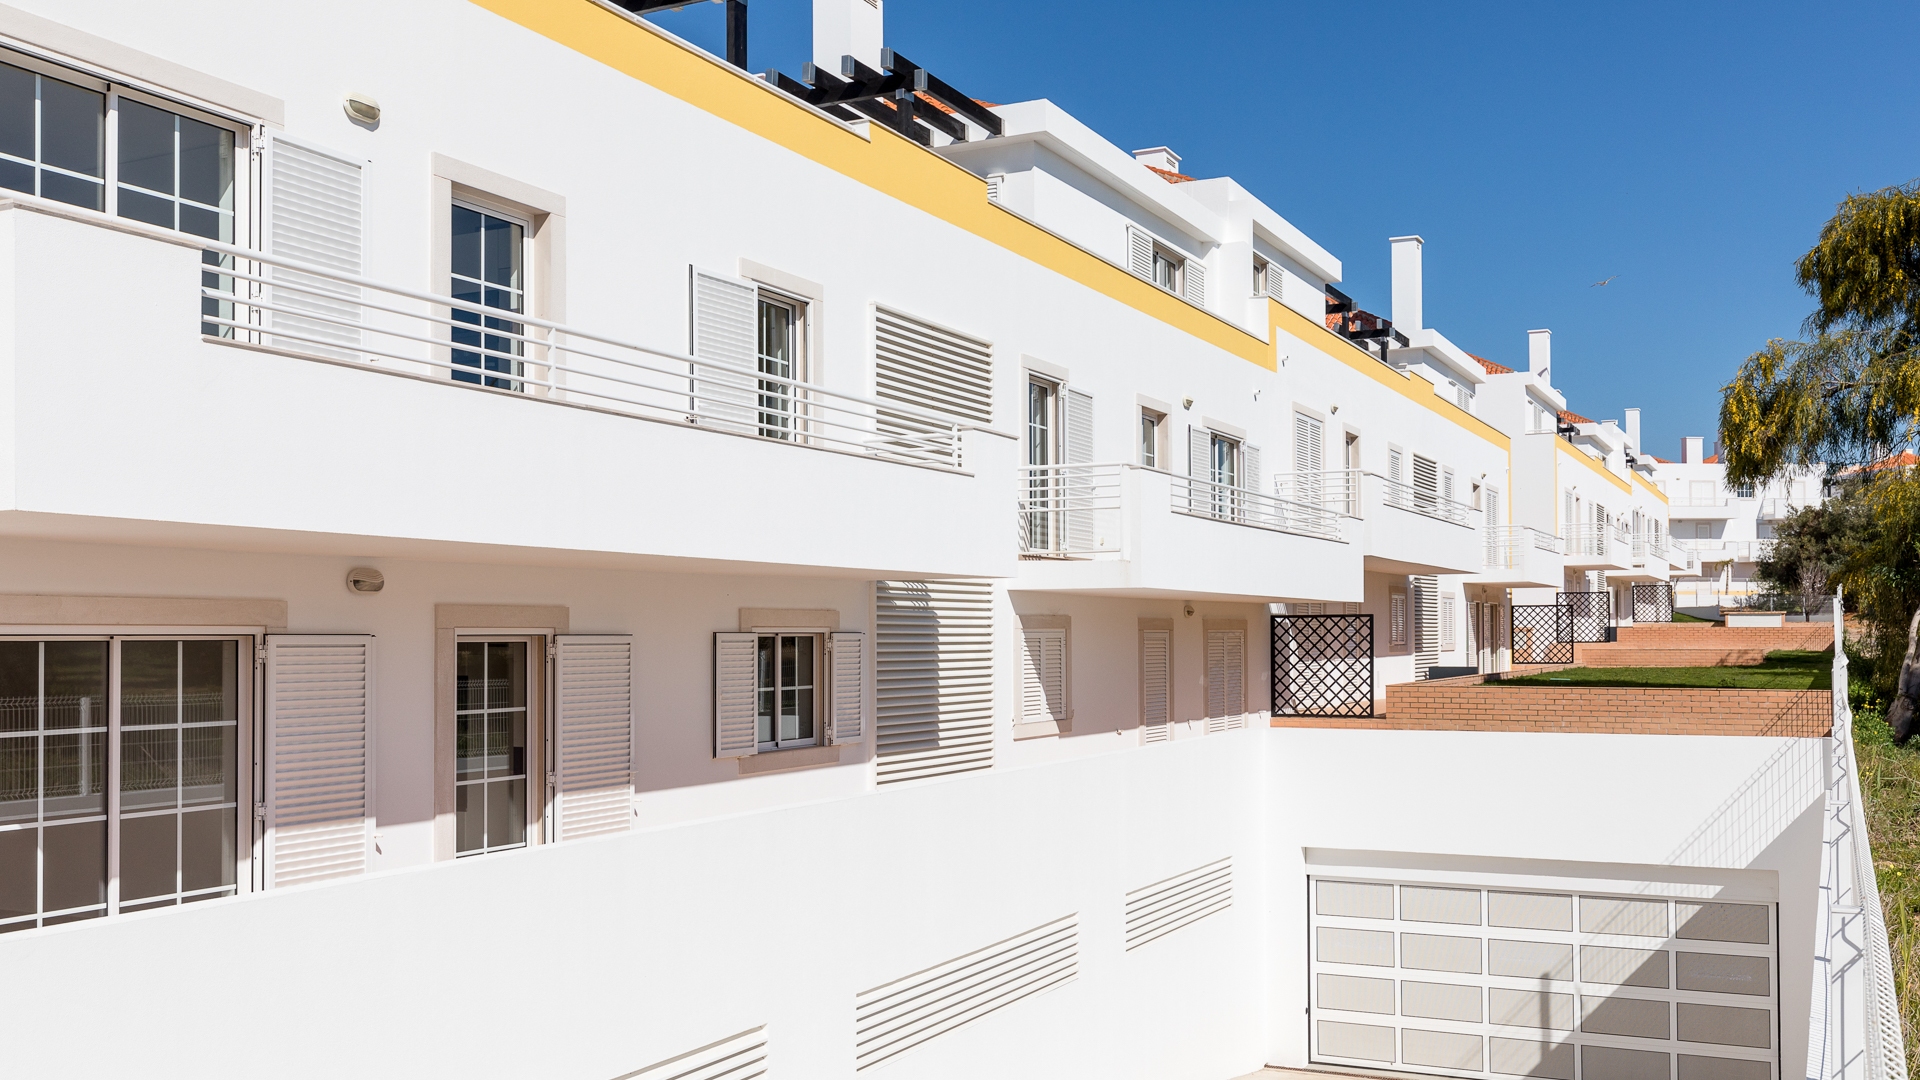 Two Bedroom Duplex Apartment with Garage and Terrace in a Great Location, Cabanas de Tavira | TV1402 